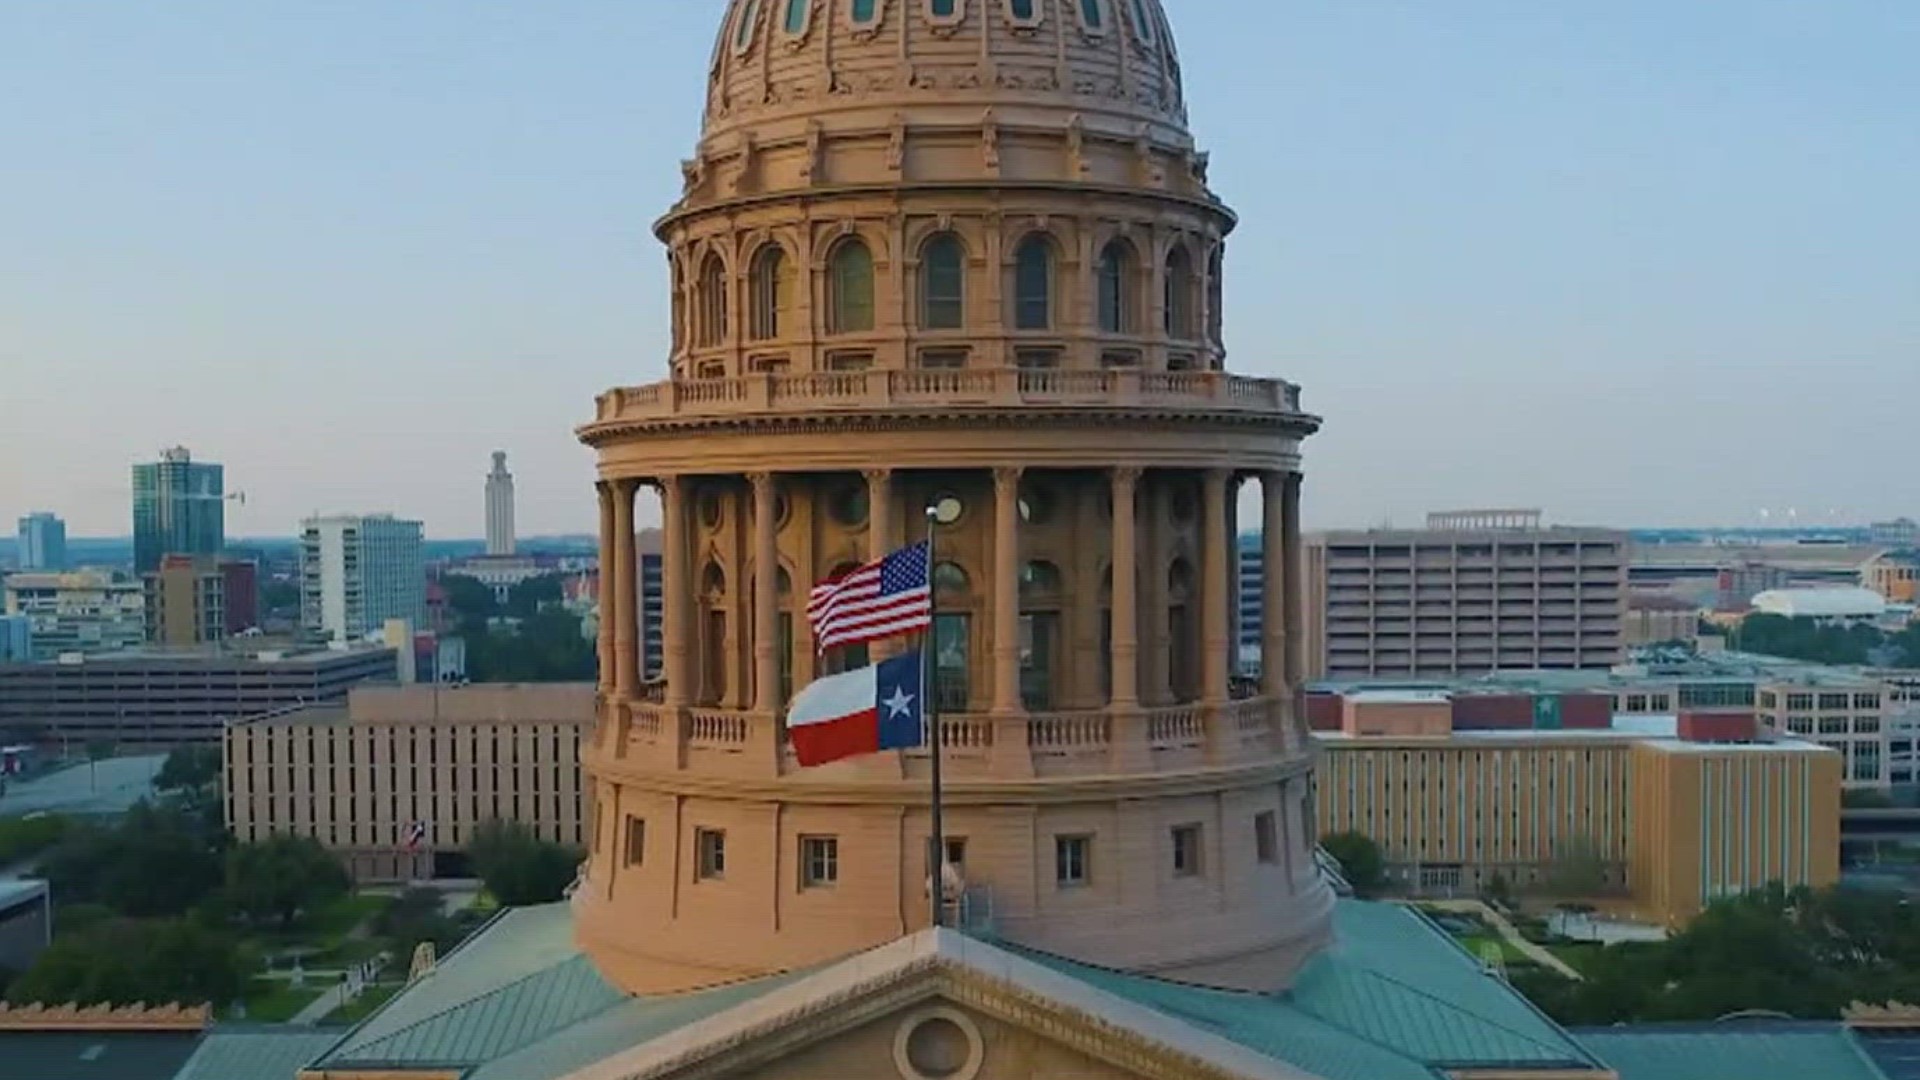 When lawmakers began their 140-day session in Austin back in January, the hope was to pass key bills that state leaders had identified as priorities.